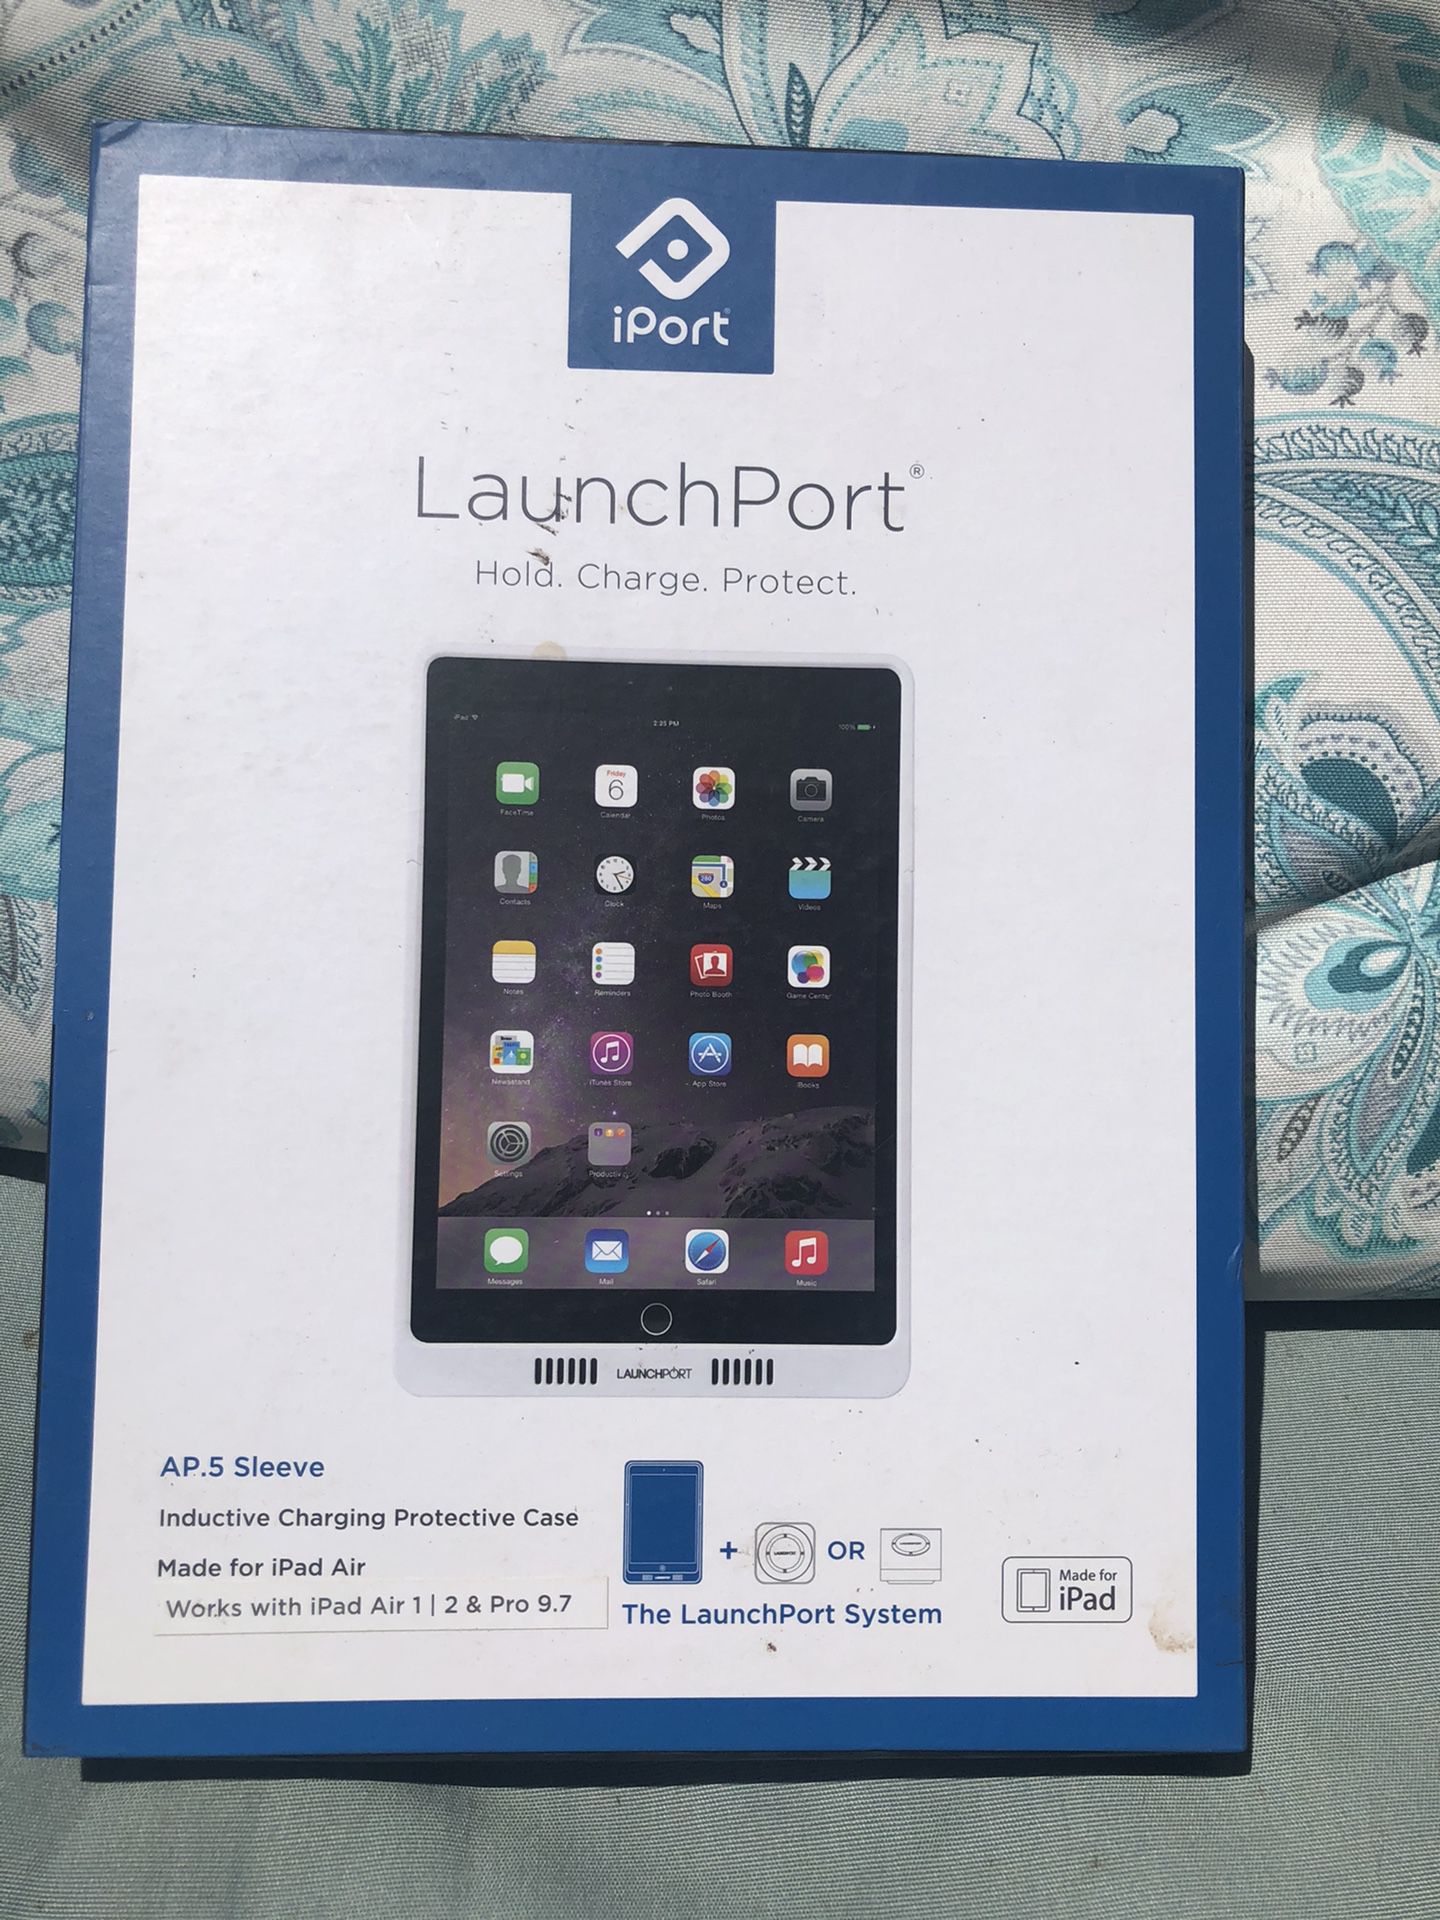 iPort LaunchPort AP.5 Sleeve for iPad Air 1 2 iPad Pro 9.7" and 5th Gen - White - BRAND NEW!